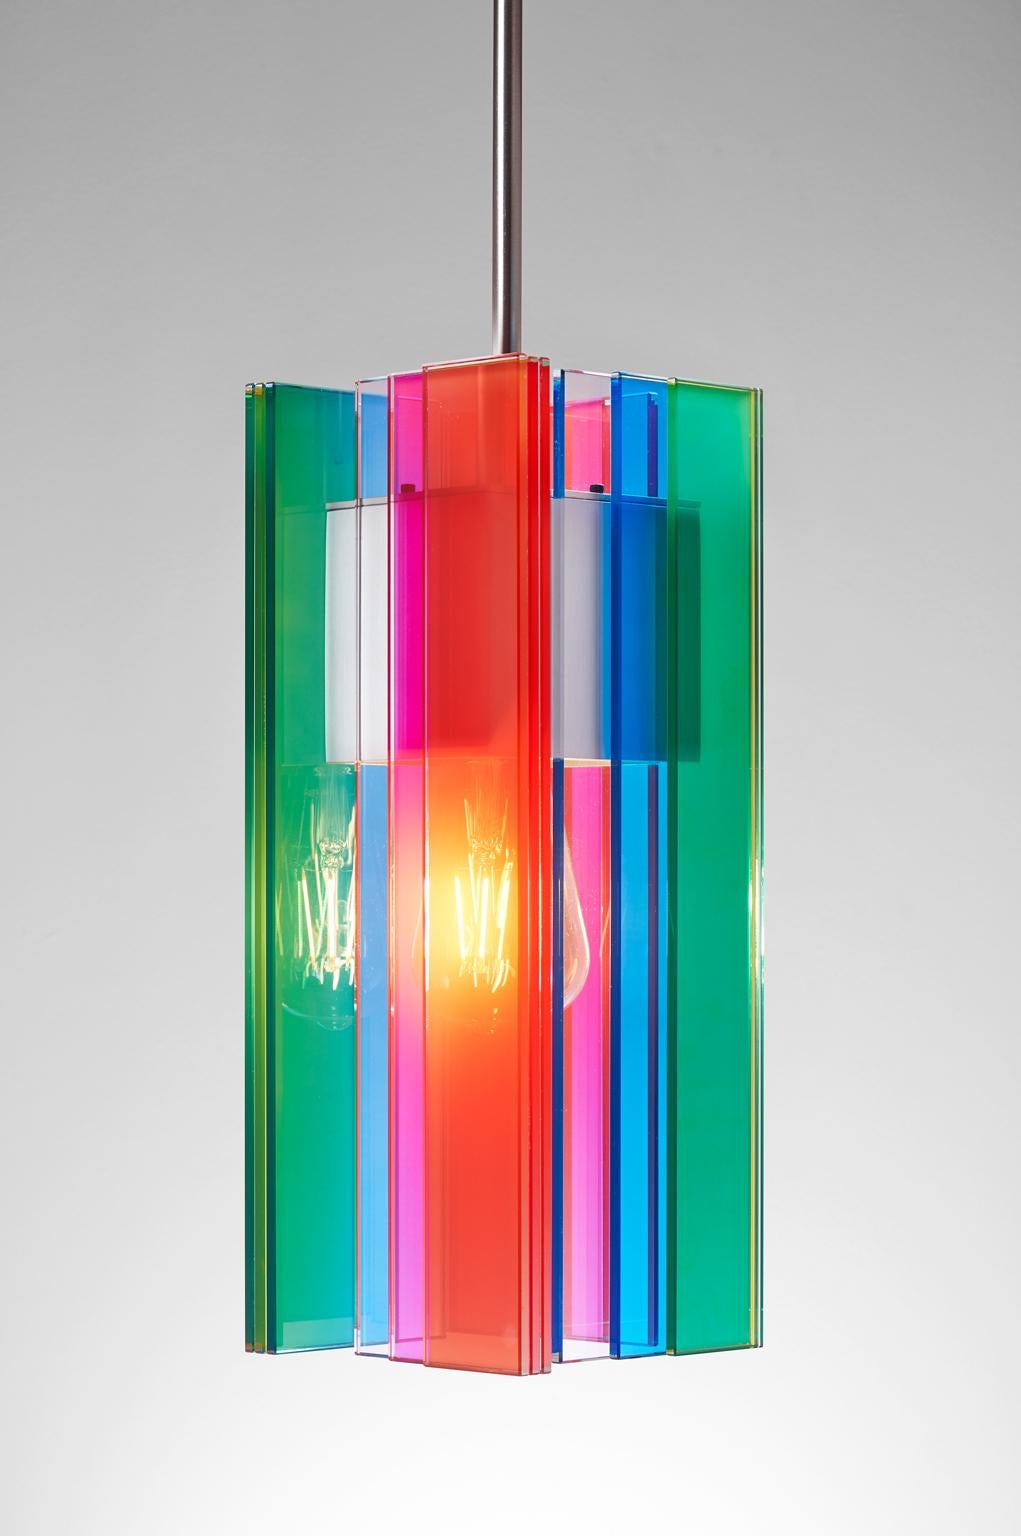 Designed and created by Sidney Hutter glass and light, this pendant has an ultra-contemporary style that looks good in any environment. The pendant is created by laminating clear glass pieces using UV adhesive to the nickel plated aluminum housing.